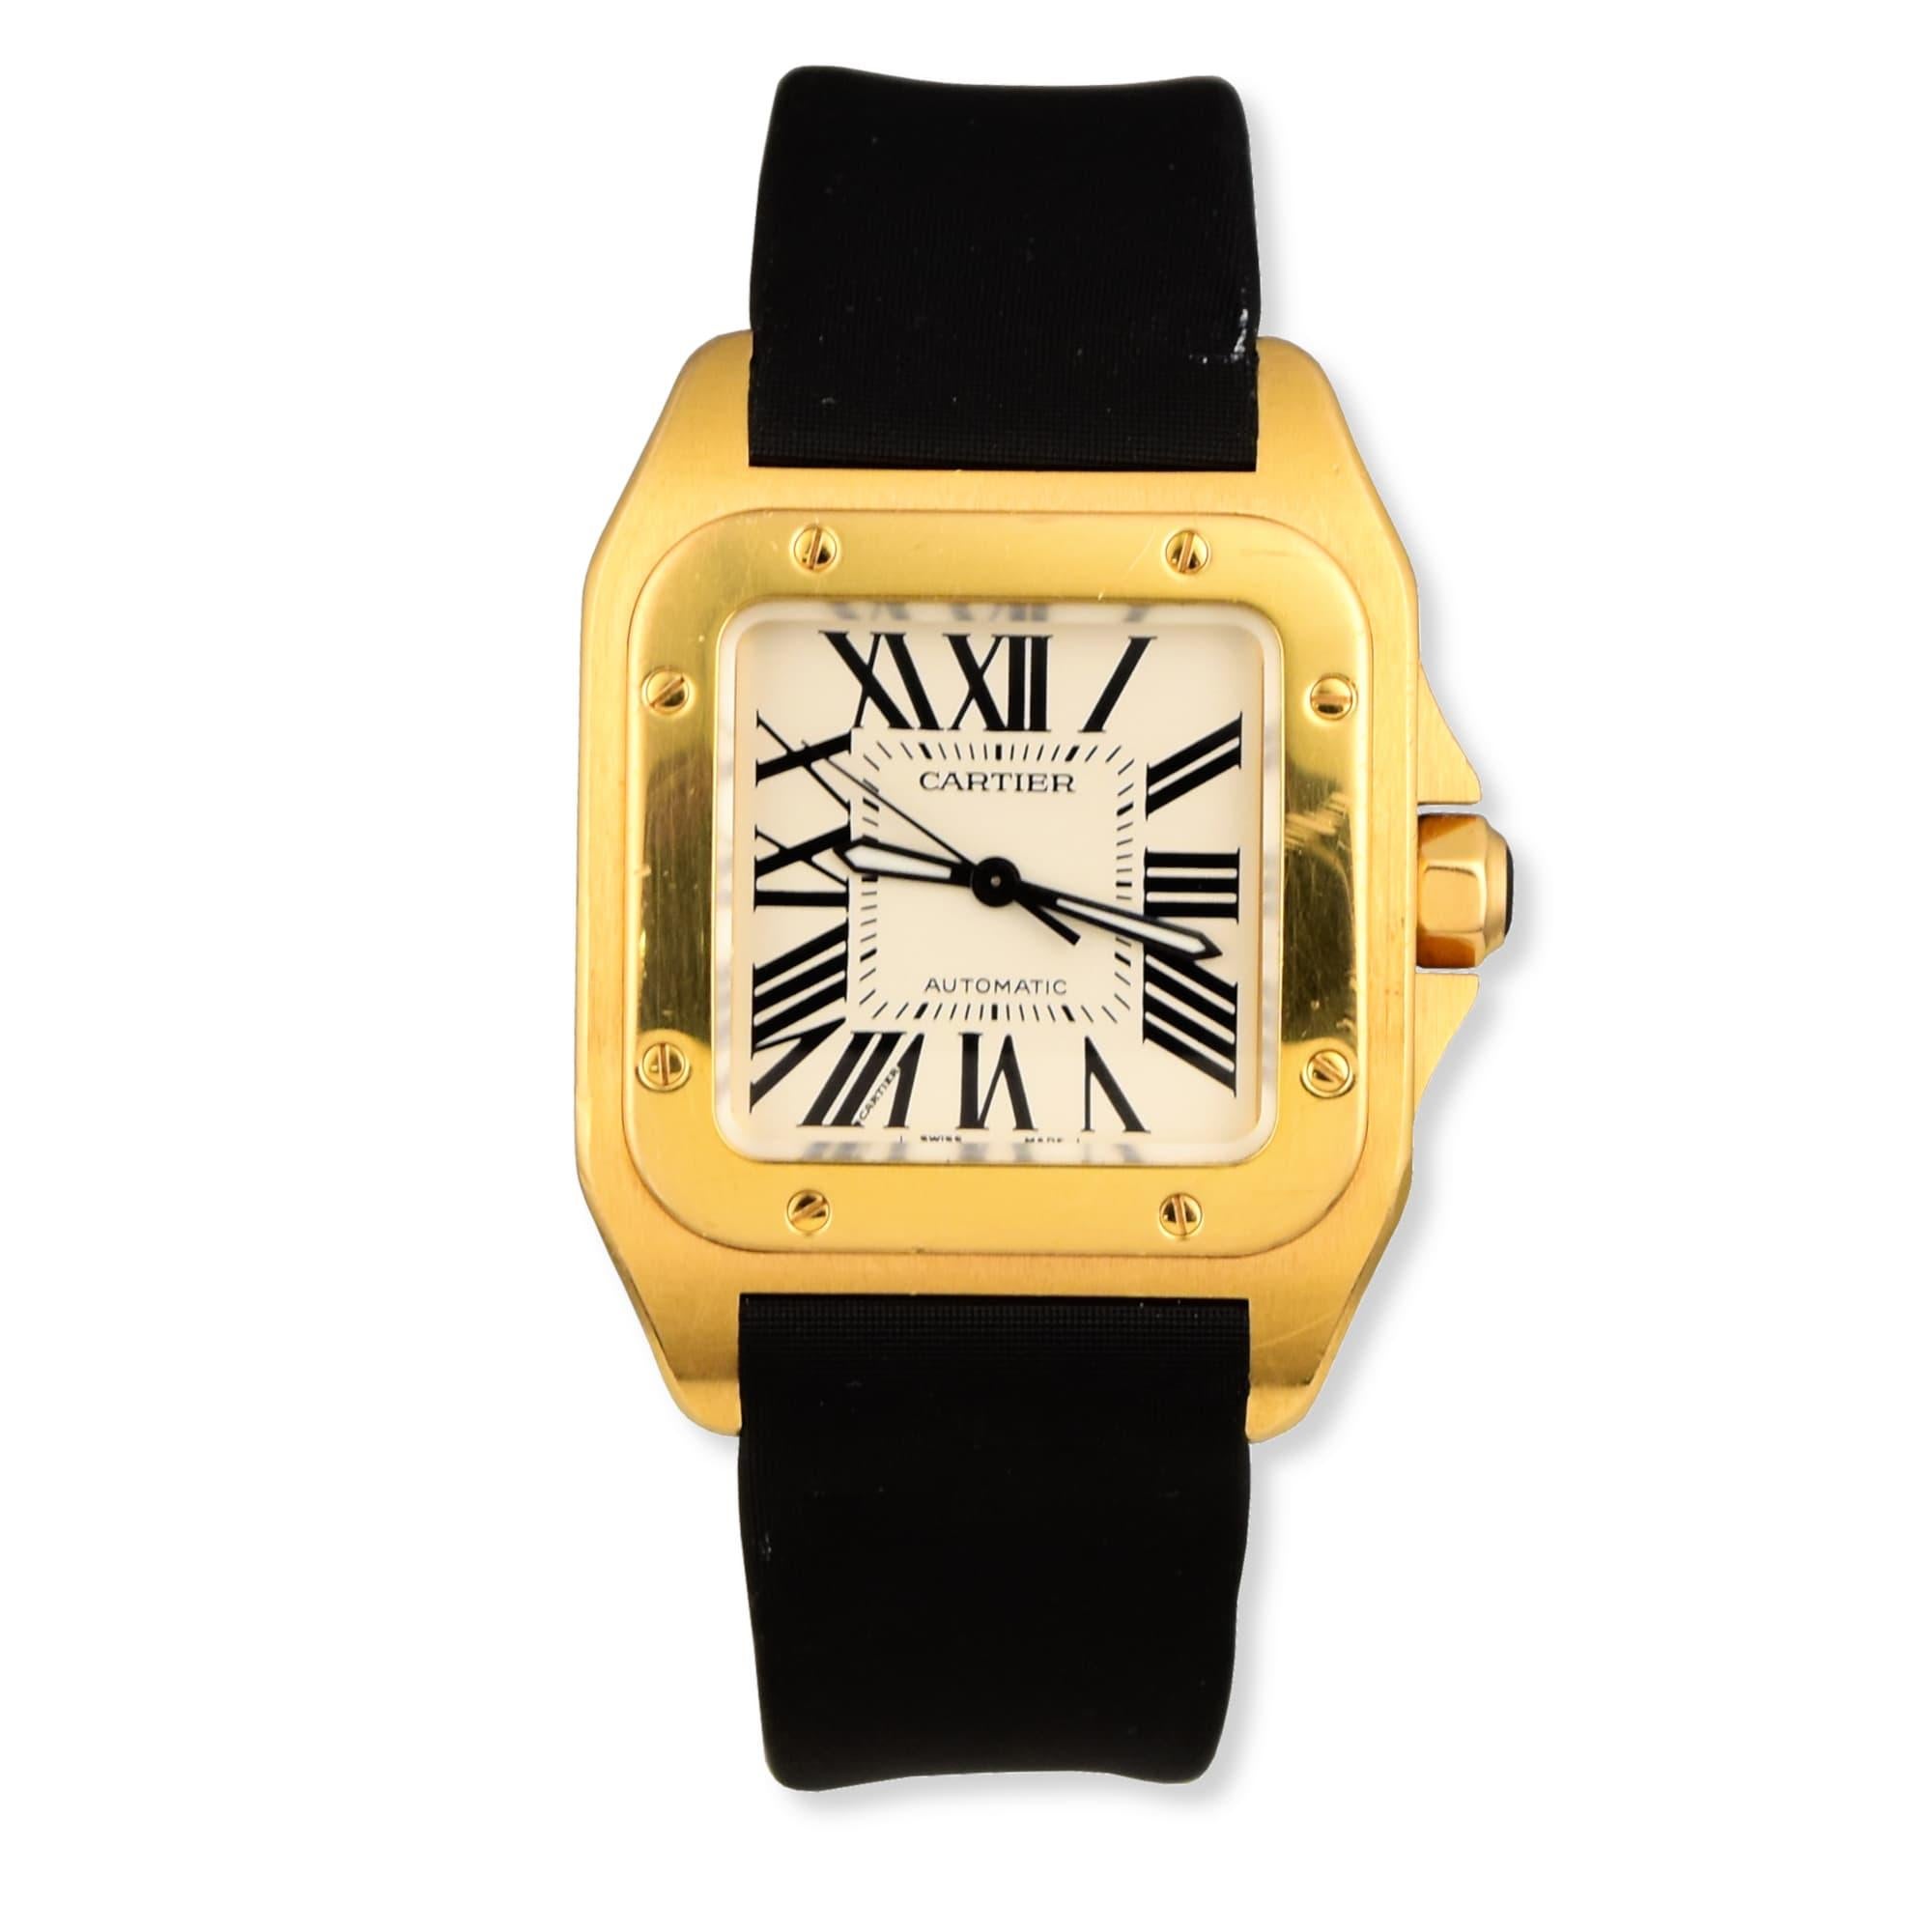 Brand: Cartier

Model Name:  Santos 100 Medium

Movement: Automatic

Case Size: 33 mm

Case Back: Solid

Case Material: 18k Yellow Gold

Bezel: 18k Yellow Gold

Dial: Cream

Bracelet:  Black Satin Strap

Hour Markers: Roman Numerals

Features: